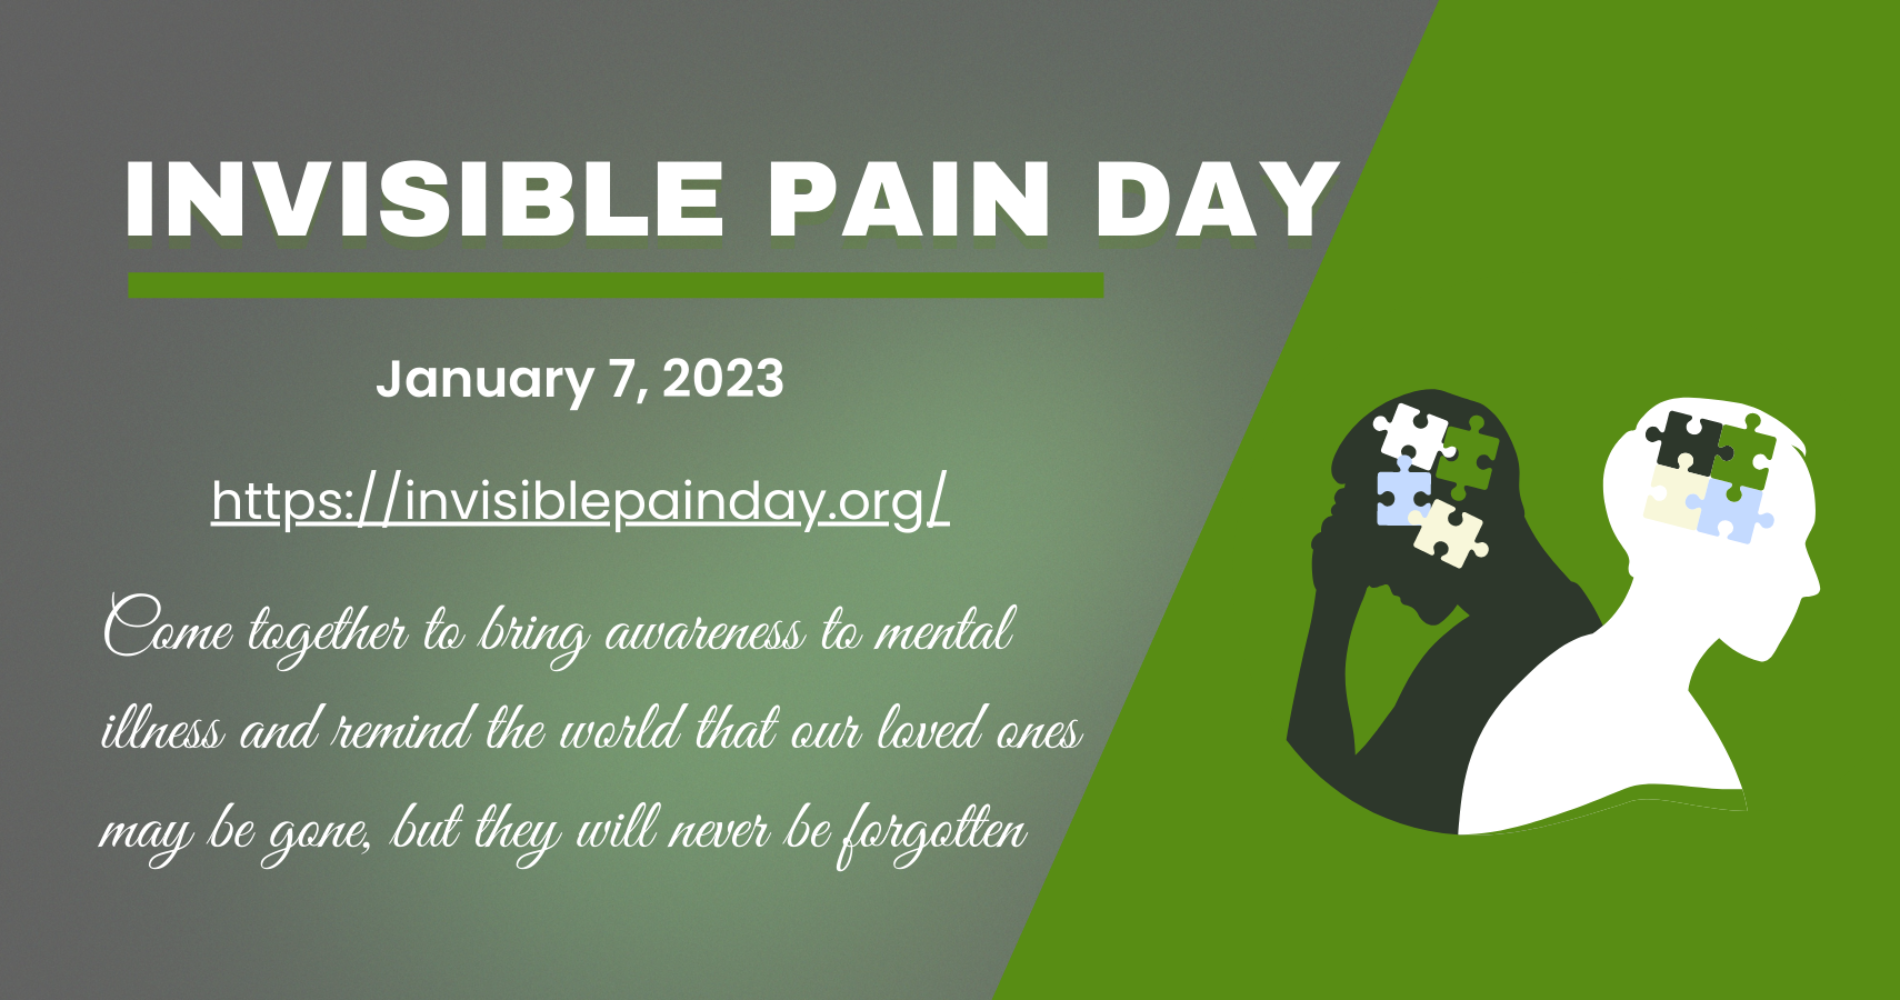 https://darrenmemorial.org/wp-content/uploads/2022/10/INVISIBLE-PAIN-DAY-4-1900x1000.png